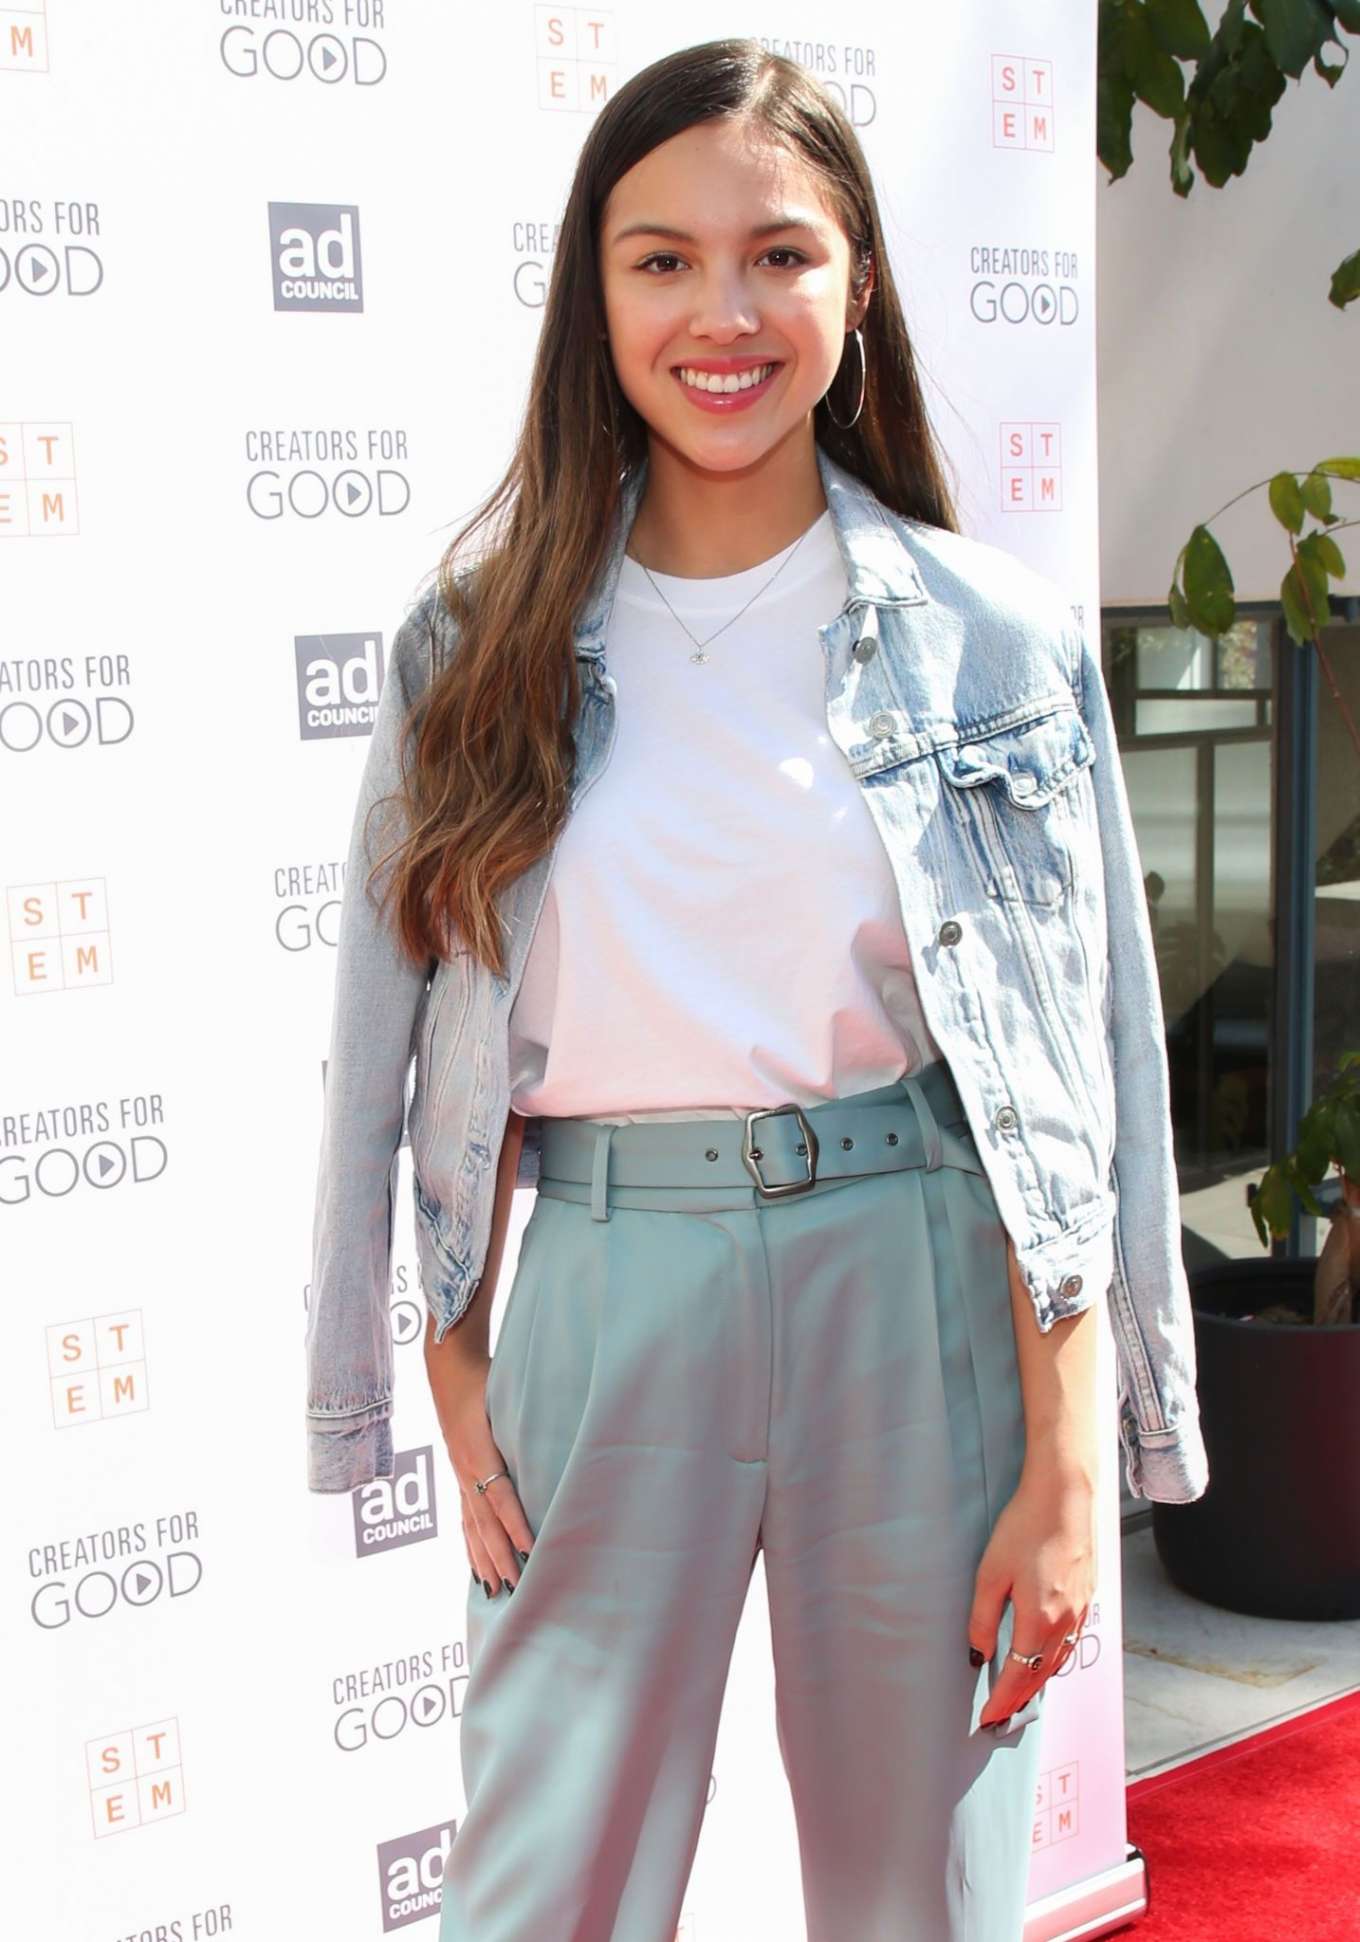 Olivia Rodrigo - Ad Council's Creators For Good Host She Can STEM Summit in Hollywood